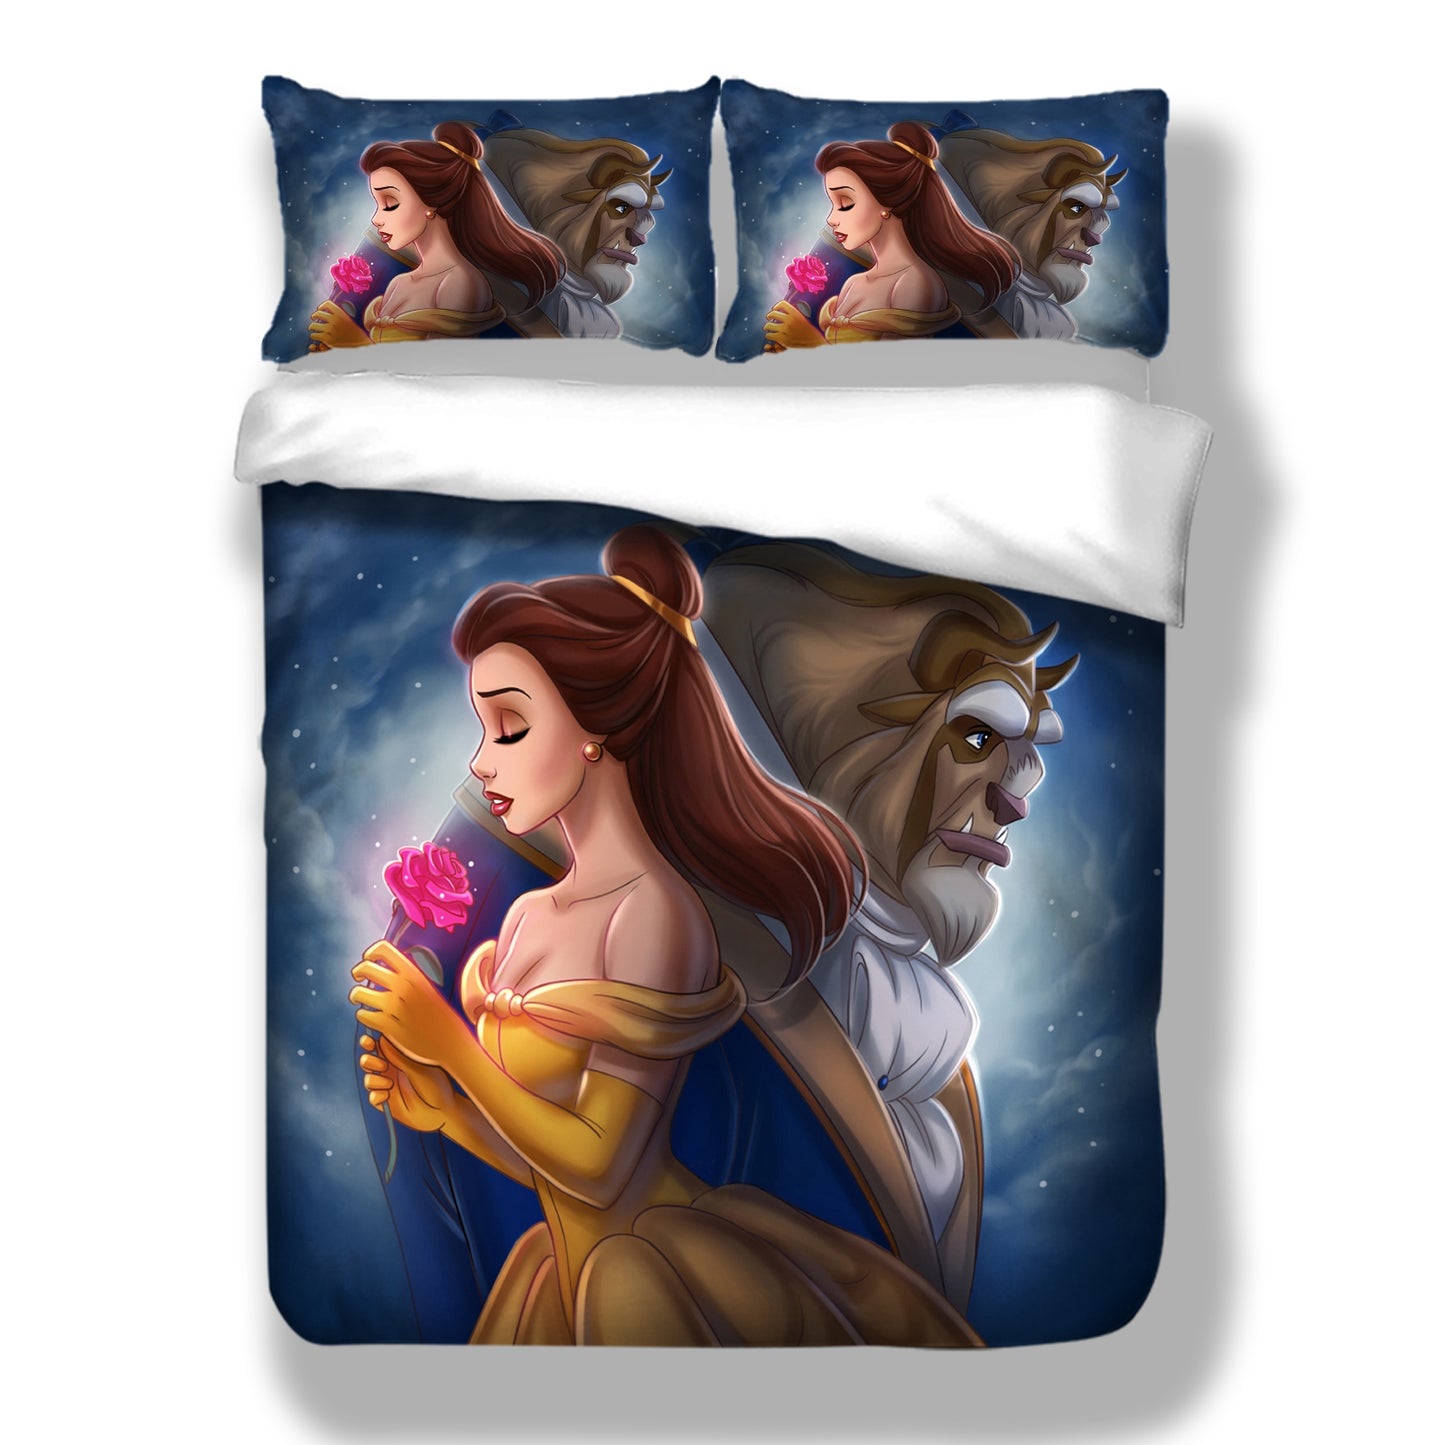 WONGS BEDDING Beauty and the beast Duvet cover set Bedding Bedroom set